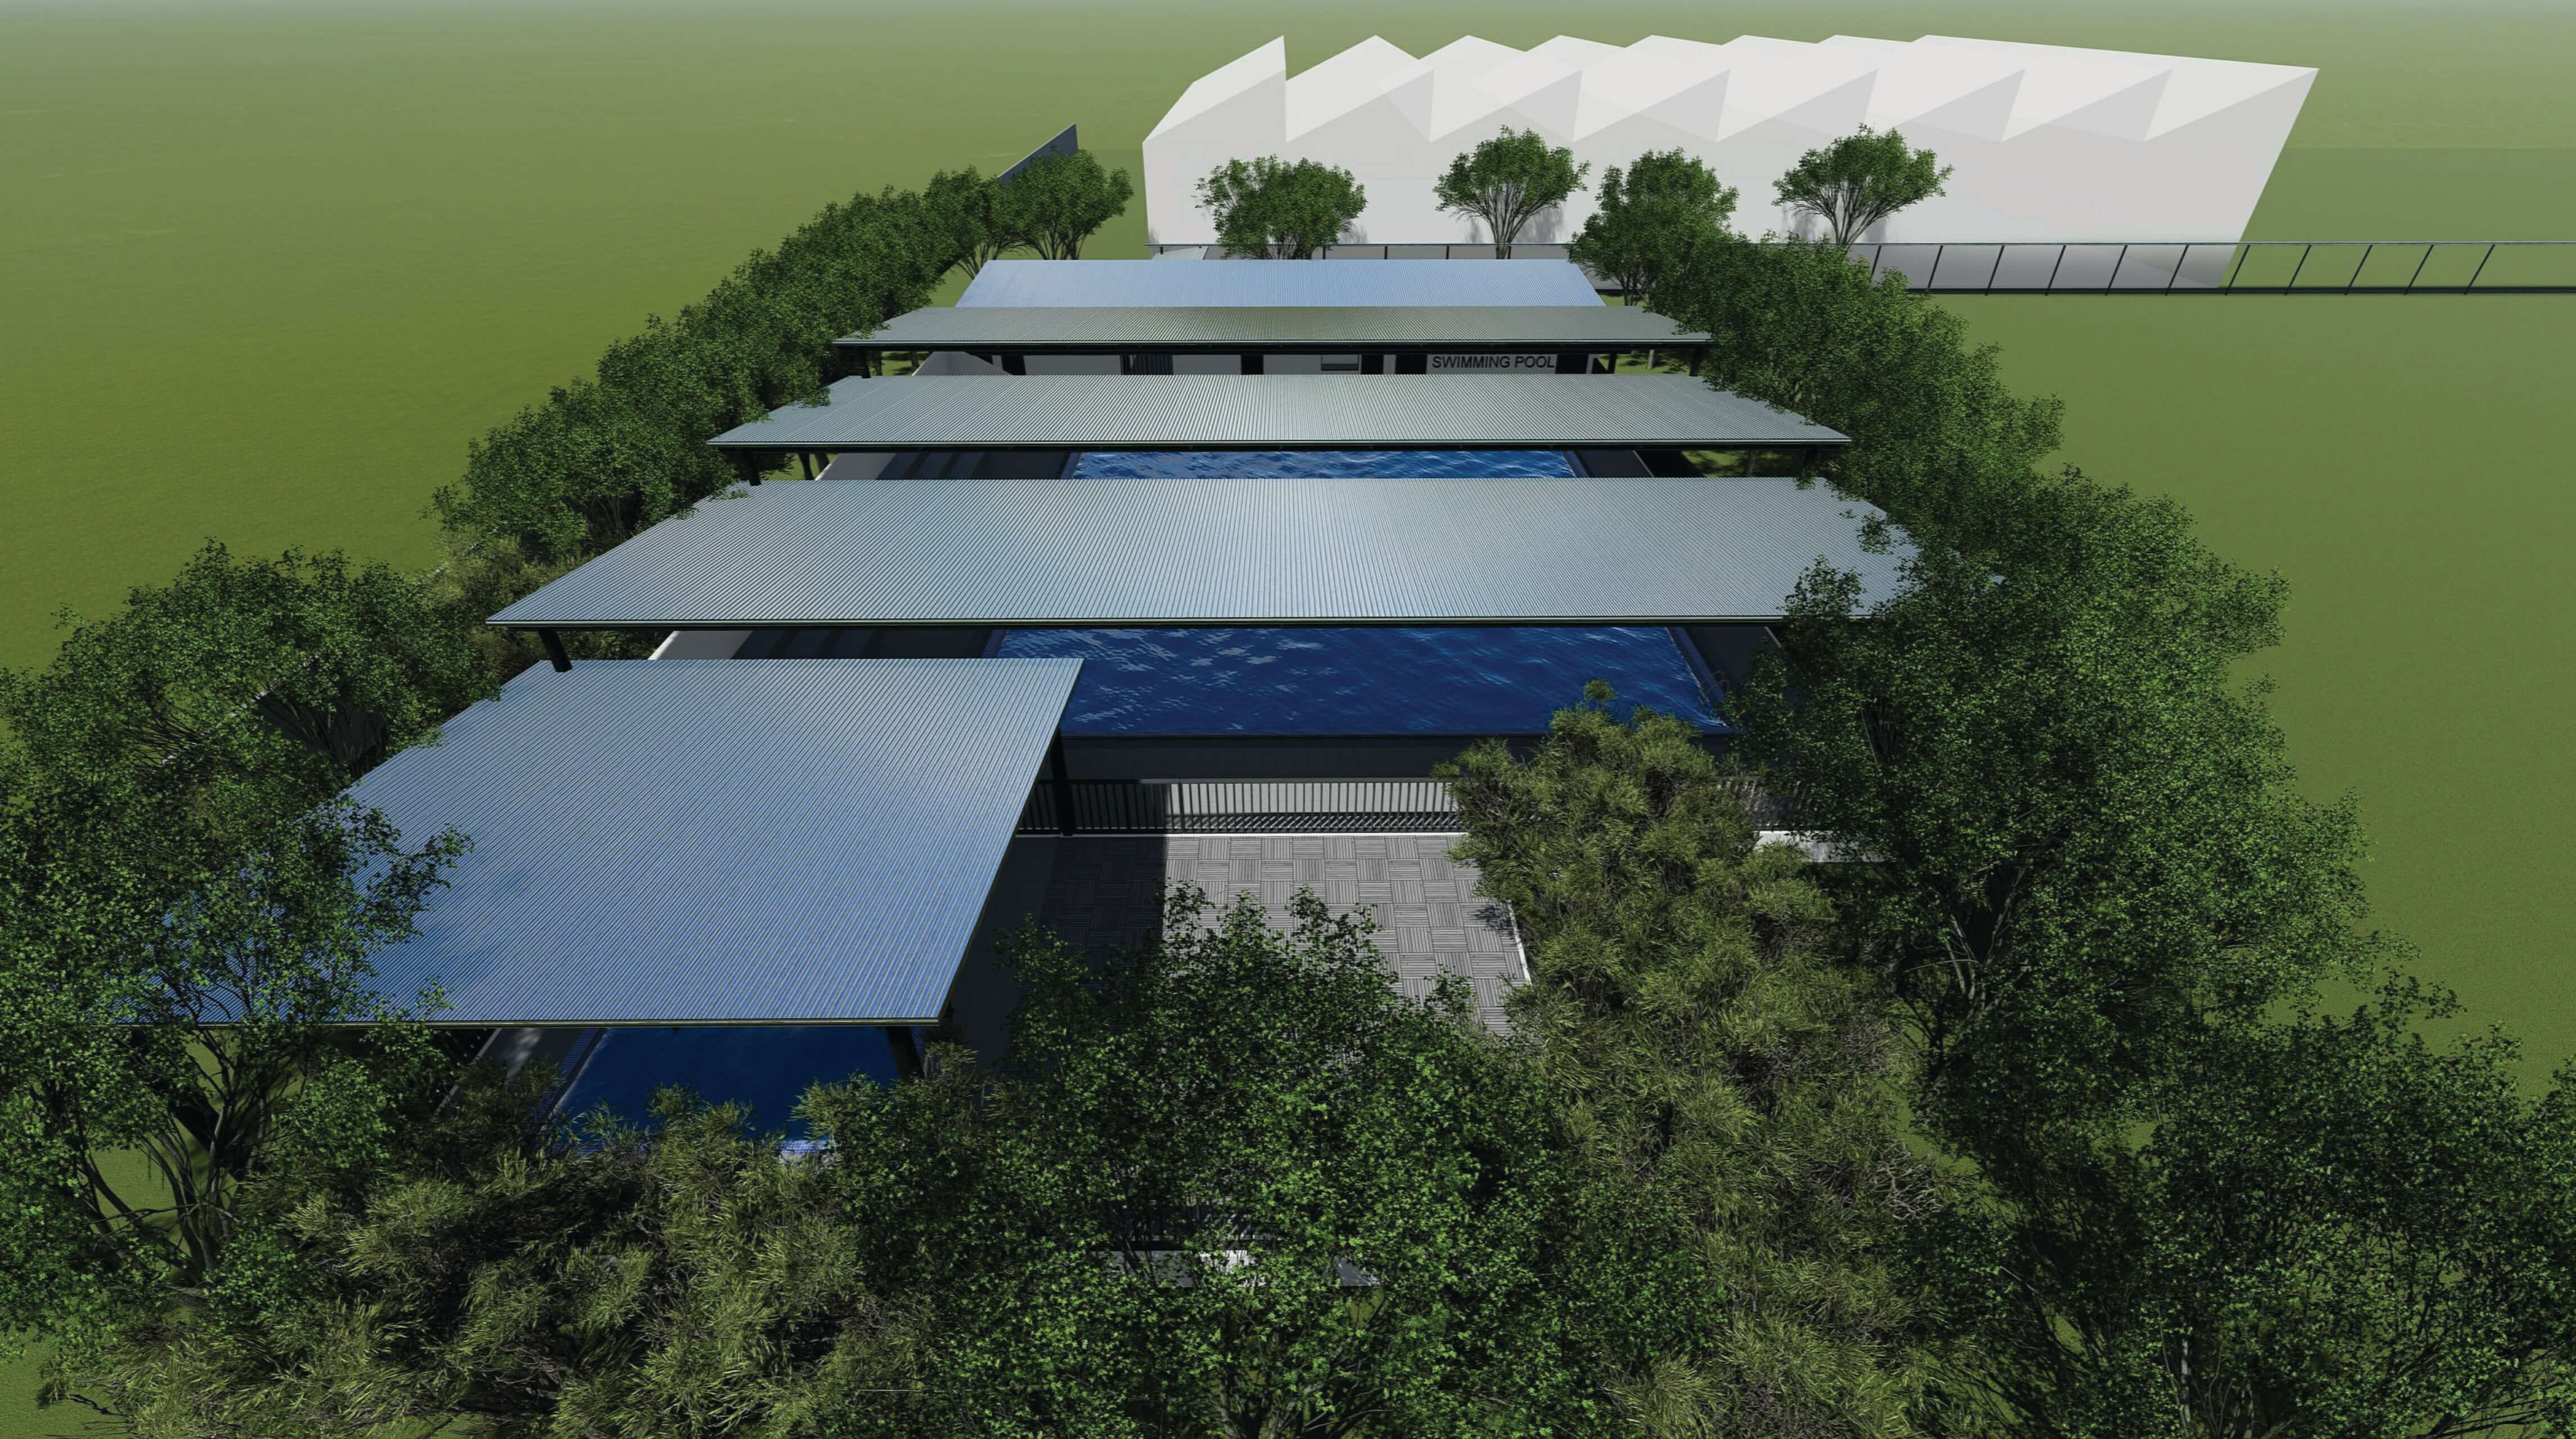 New Northbridge Aquatics Centre to provide students with world-class learning and training facility-new-northbridge-aquatics-centre-to-provide-students-with-world-class-learning-and-training-facility-NorthBridge Swimming Pool Concept OPTION 3B_E 1 115